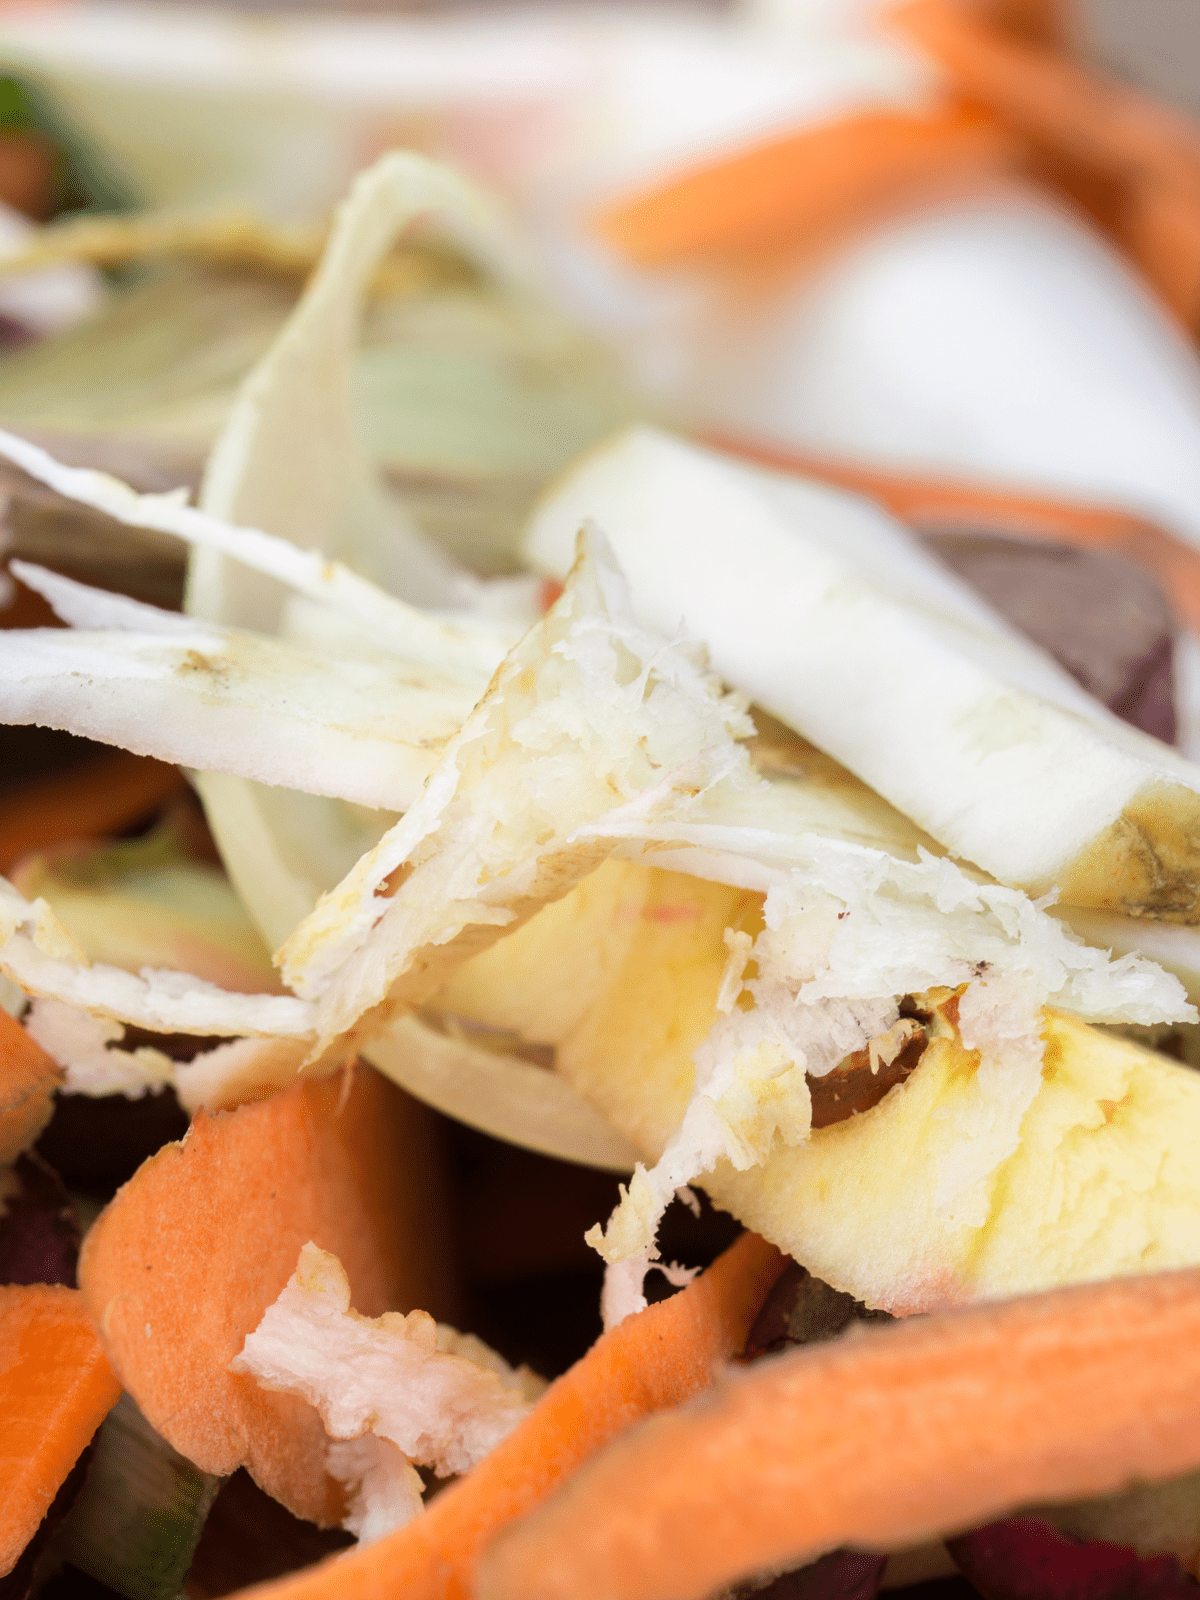 Vegetables scraps used to make bone broth with chicken carcass.